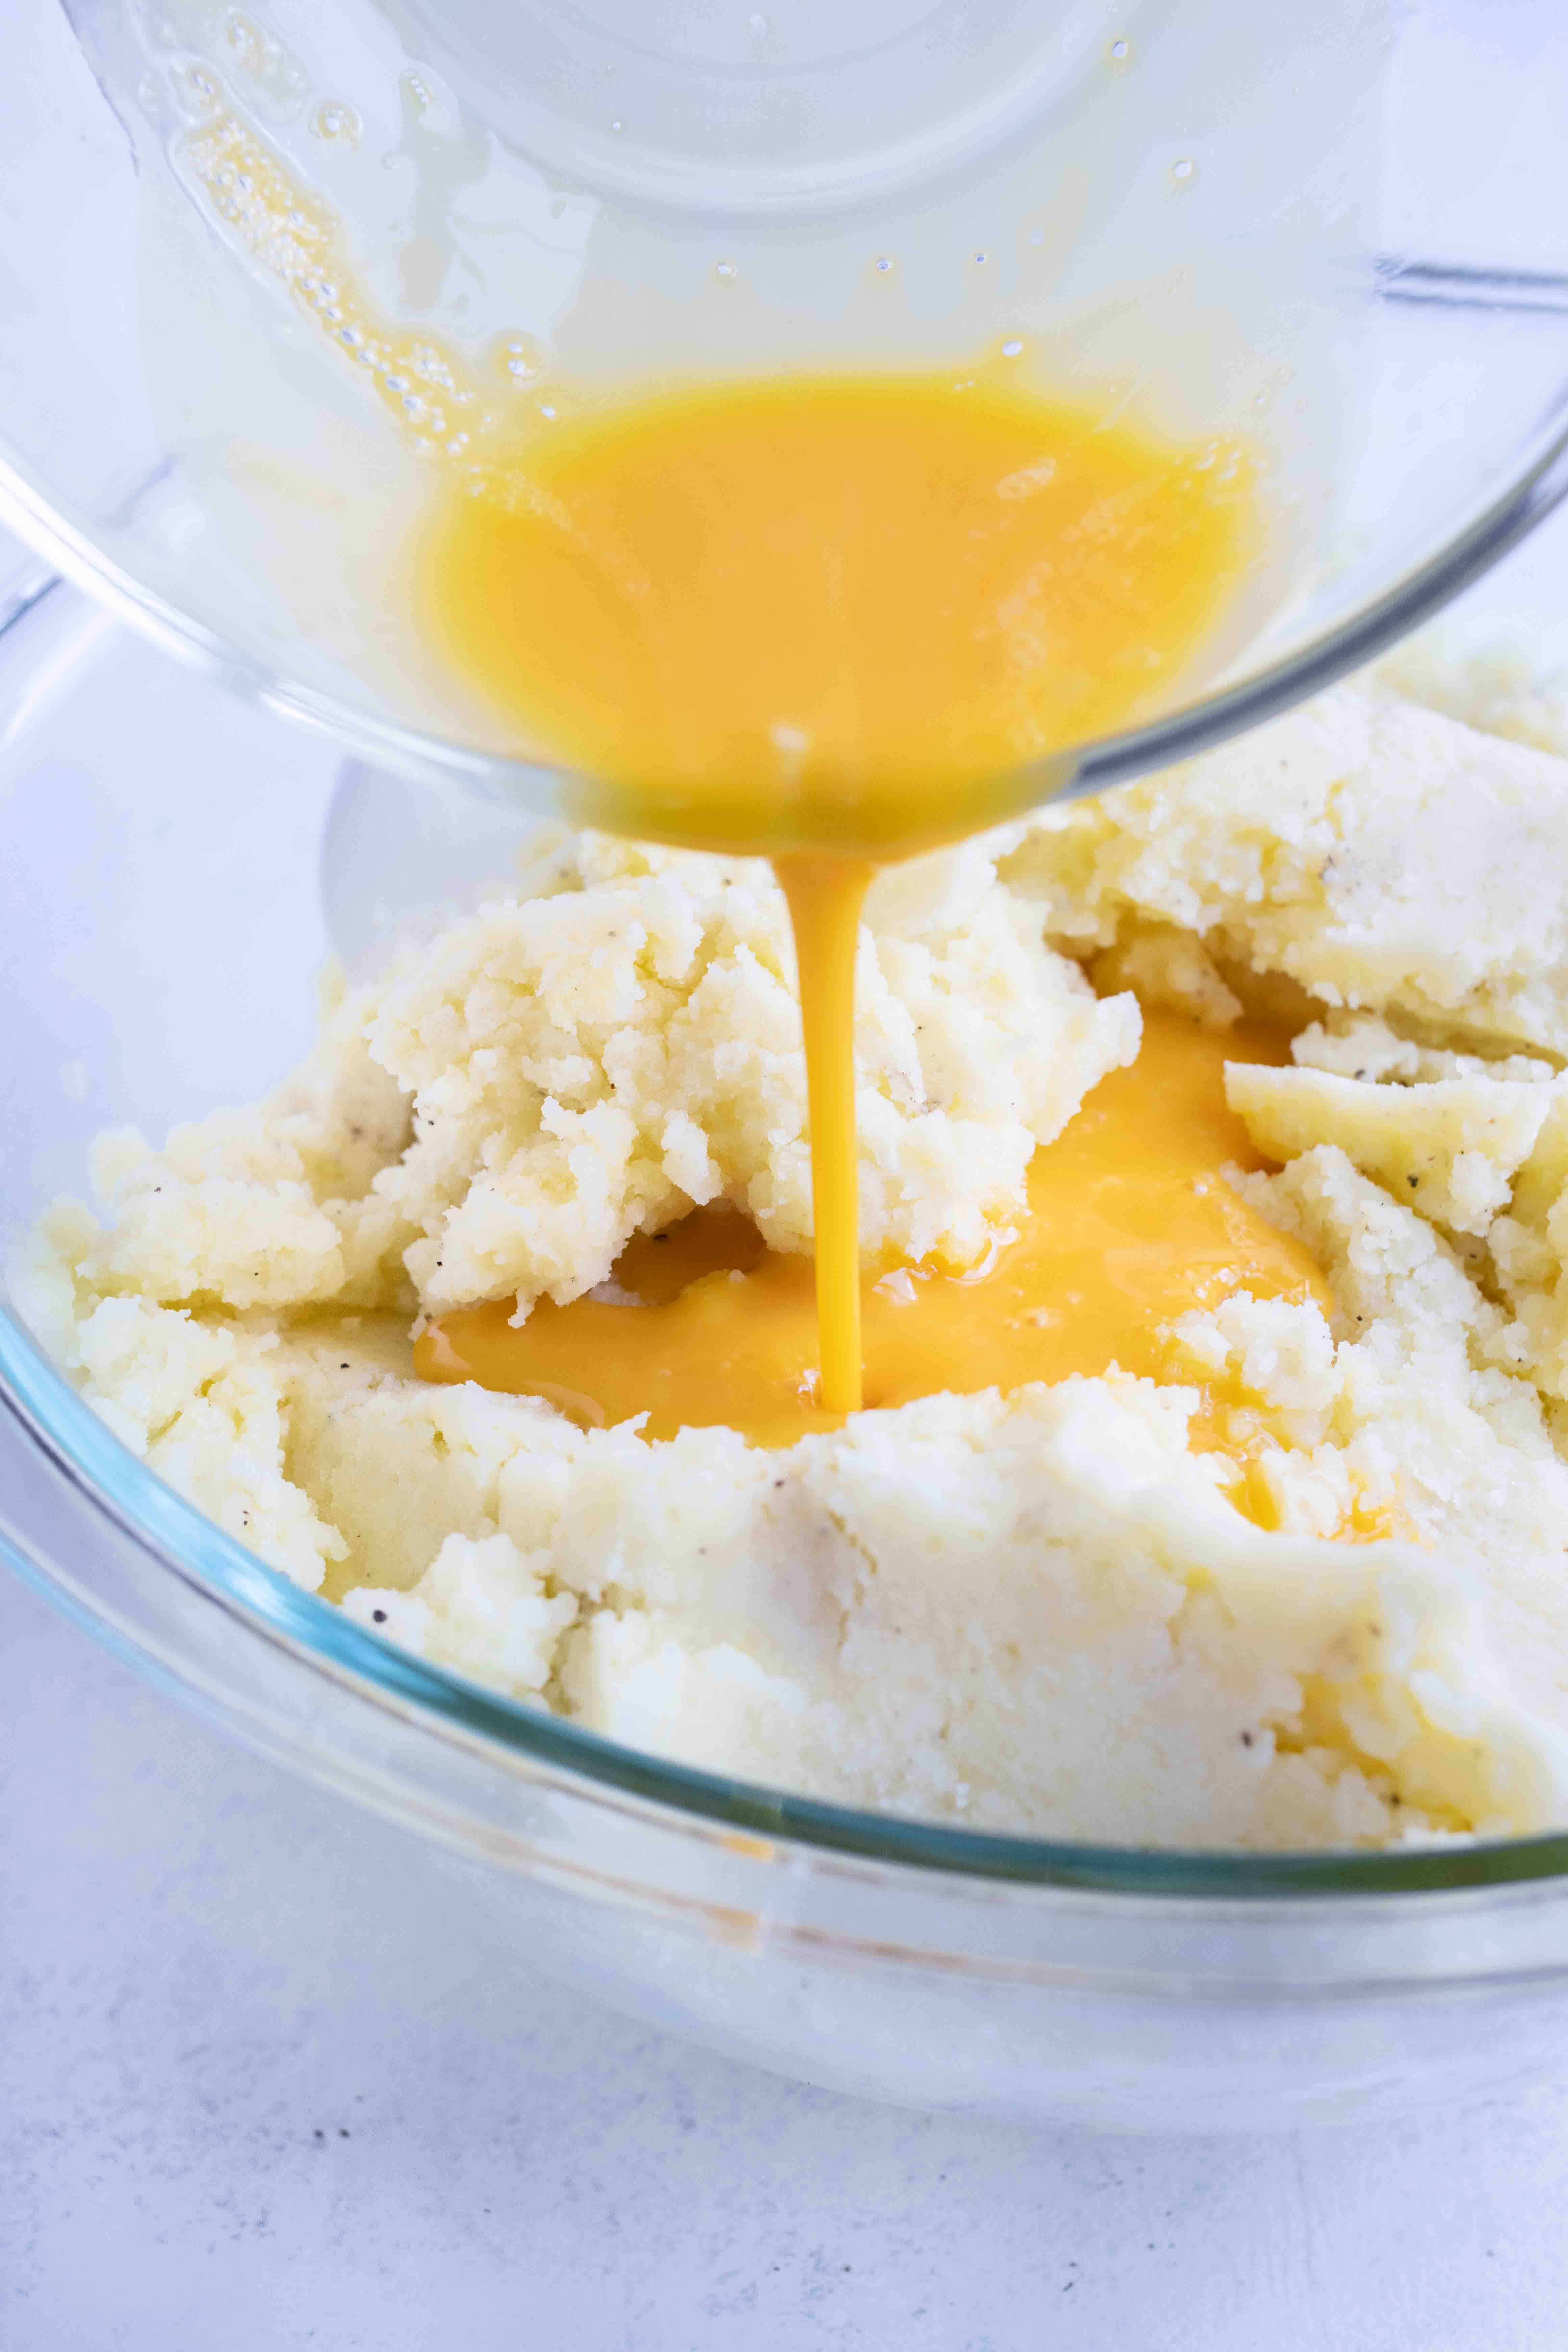 Egg yolks are added to the potato dough.